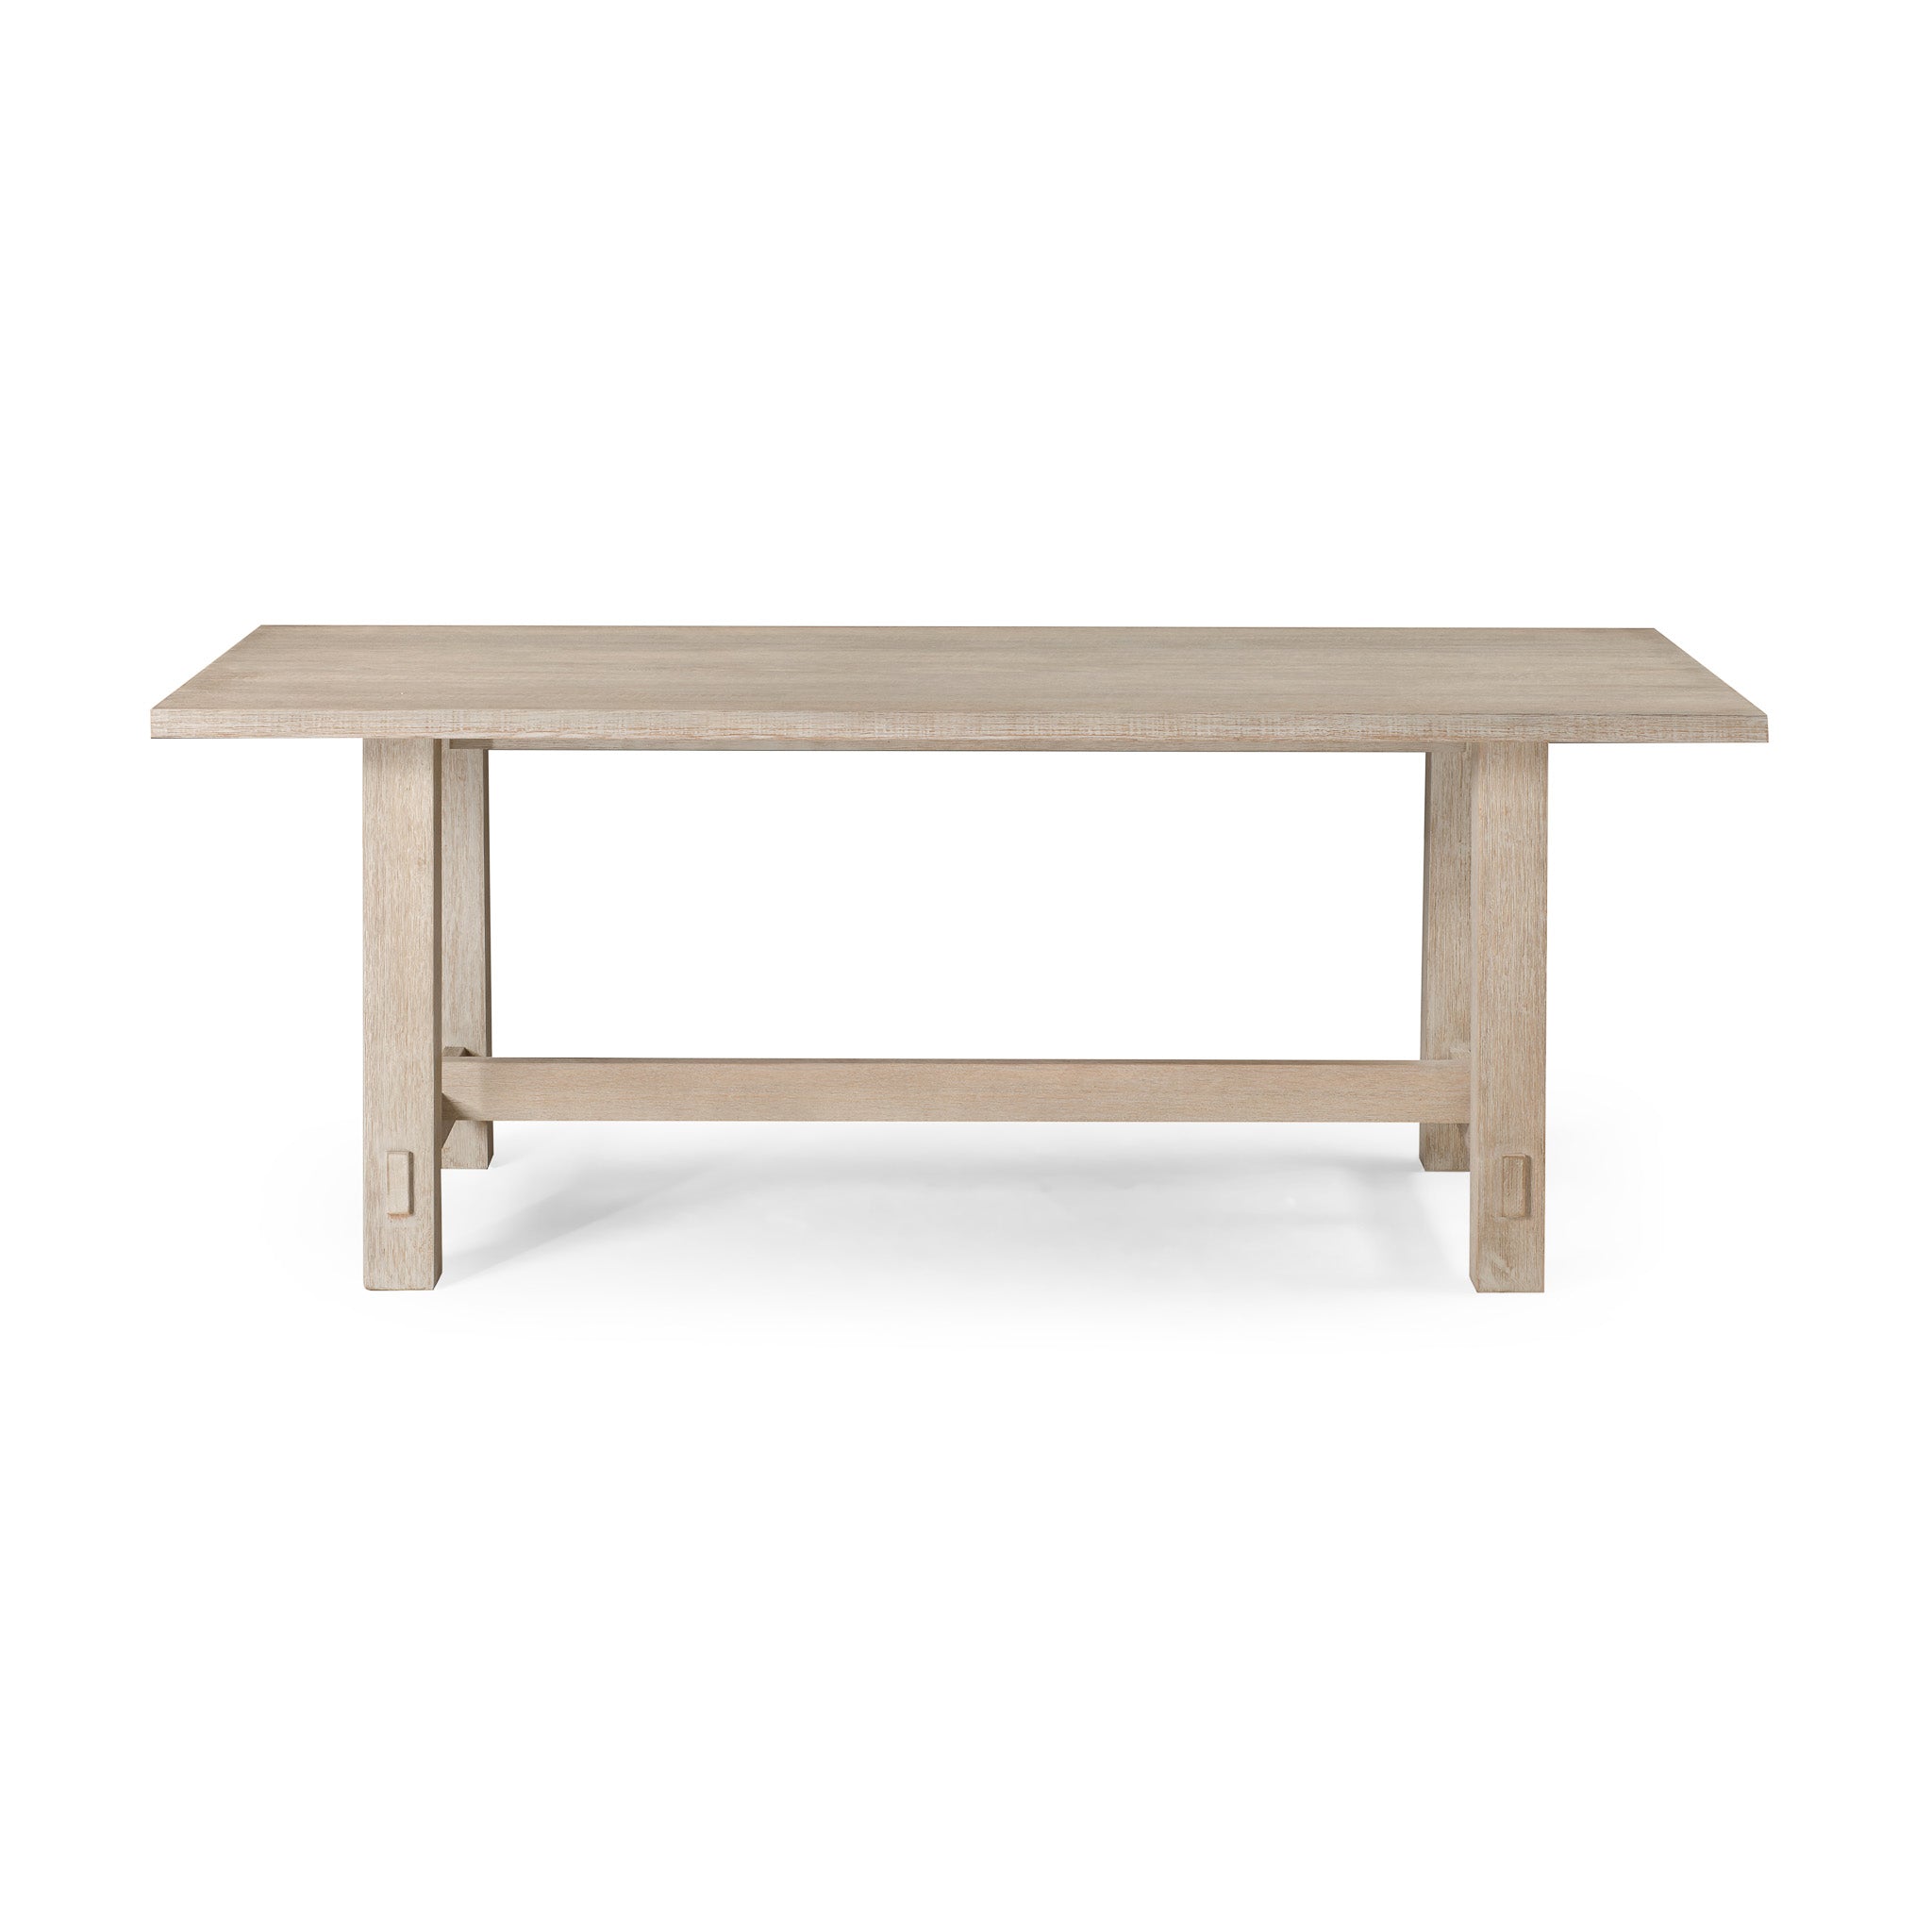 Yves Organic Rectangular Wooden Dining Table in Weathered White Finish in Dining Furniture by Maven Lane